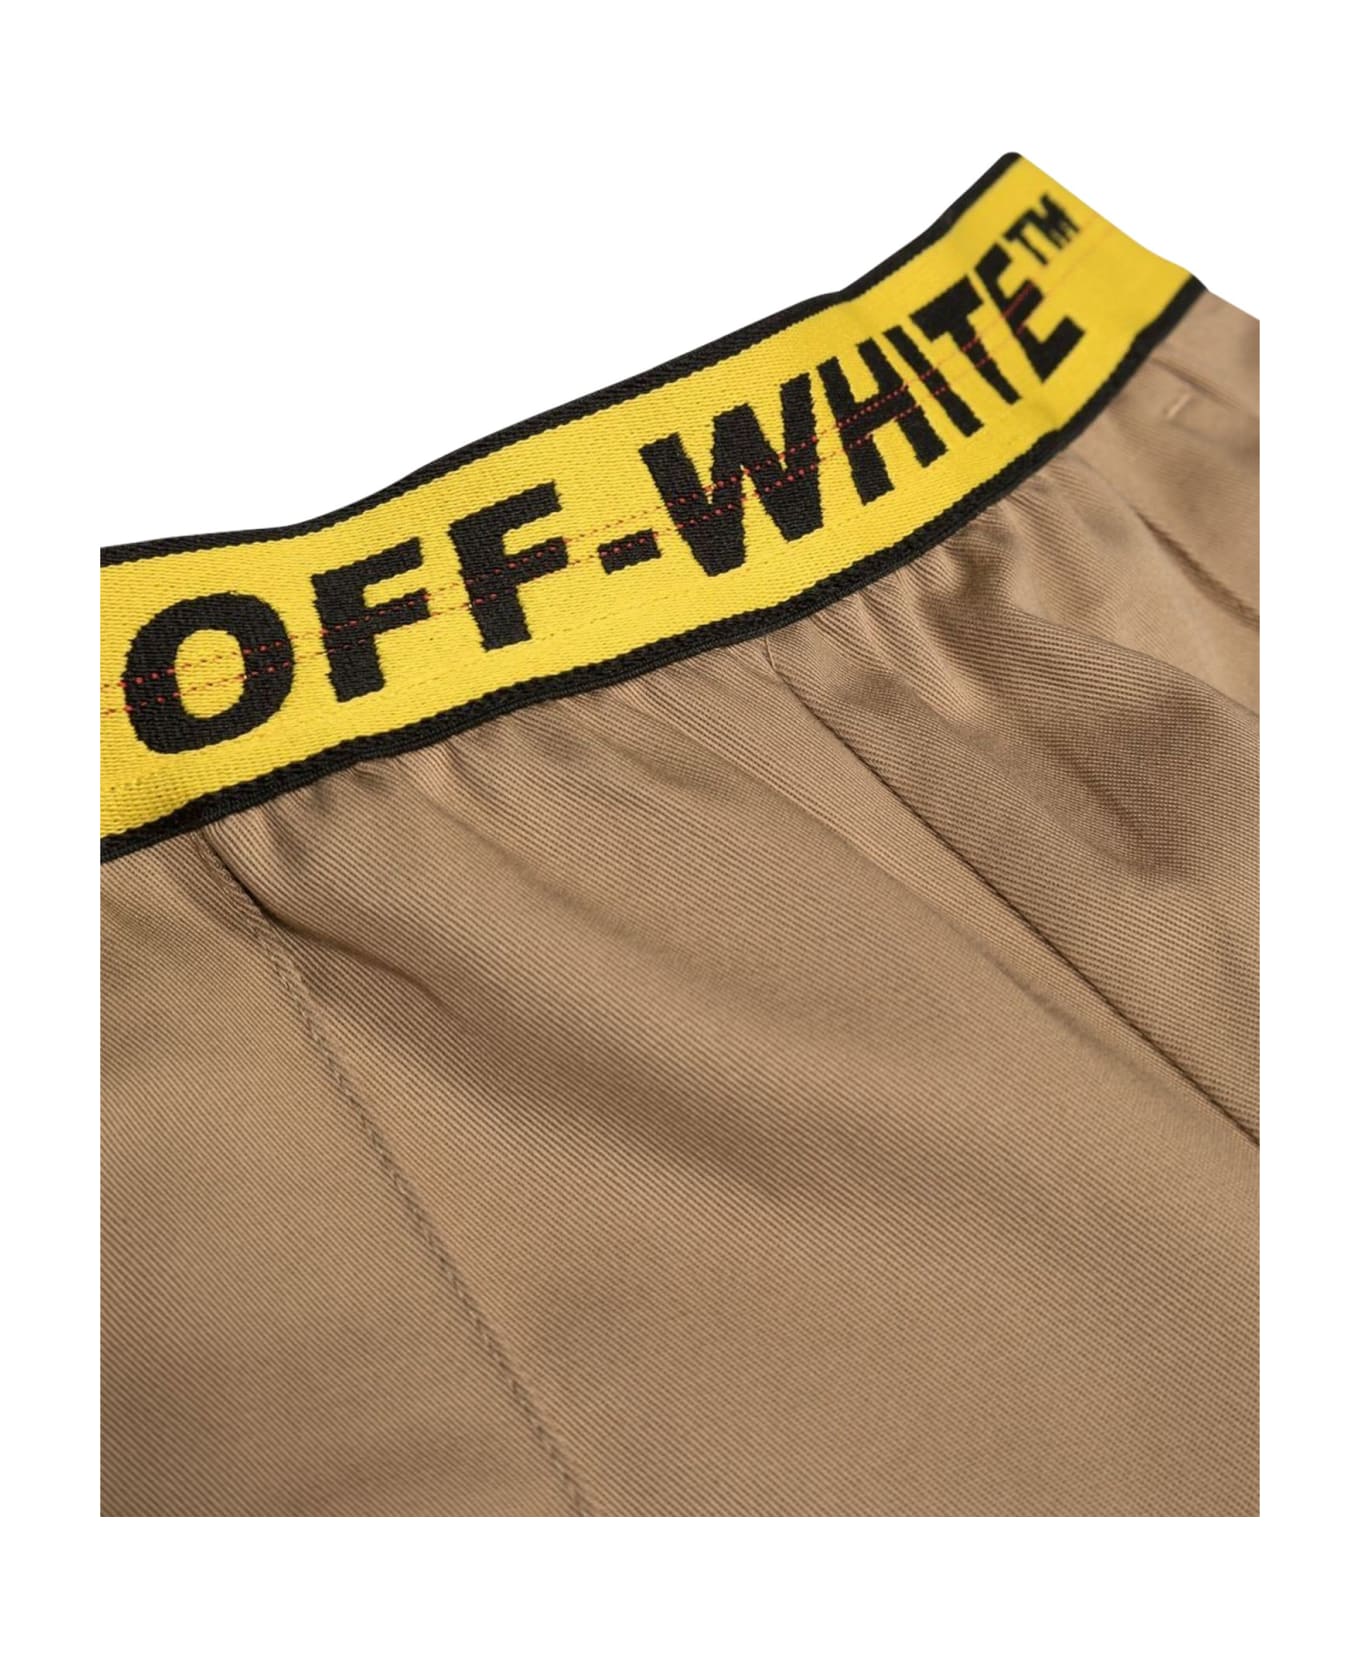 Off-White Industrial Chino Pant - BEIGE